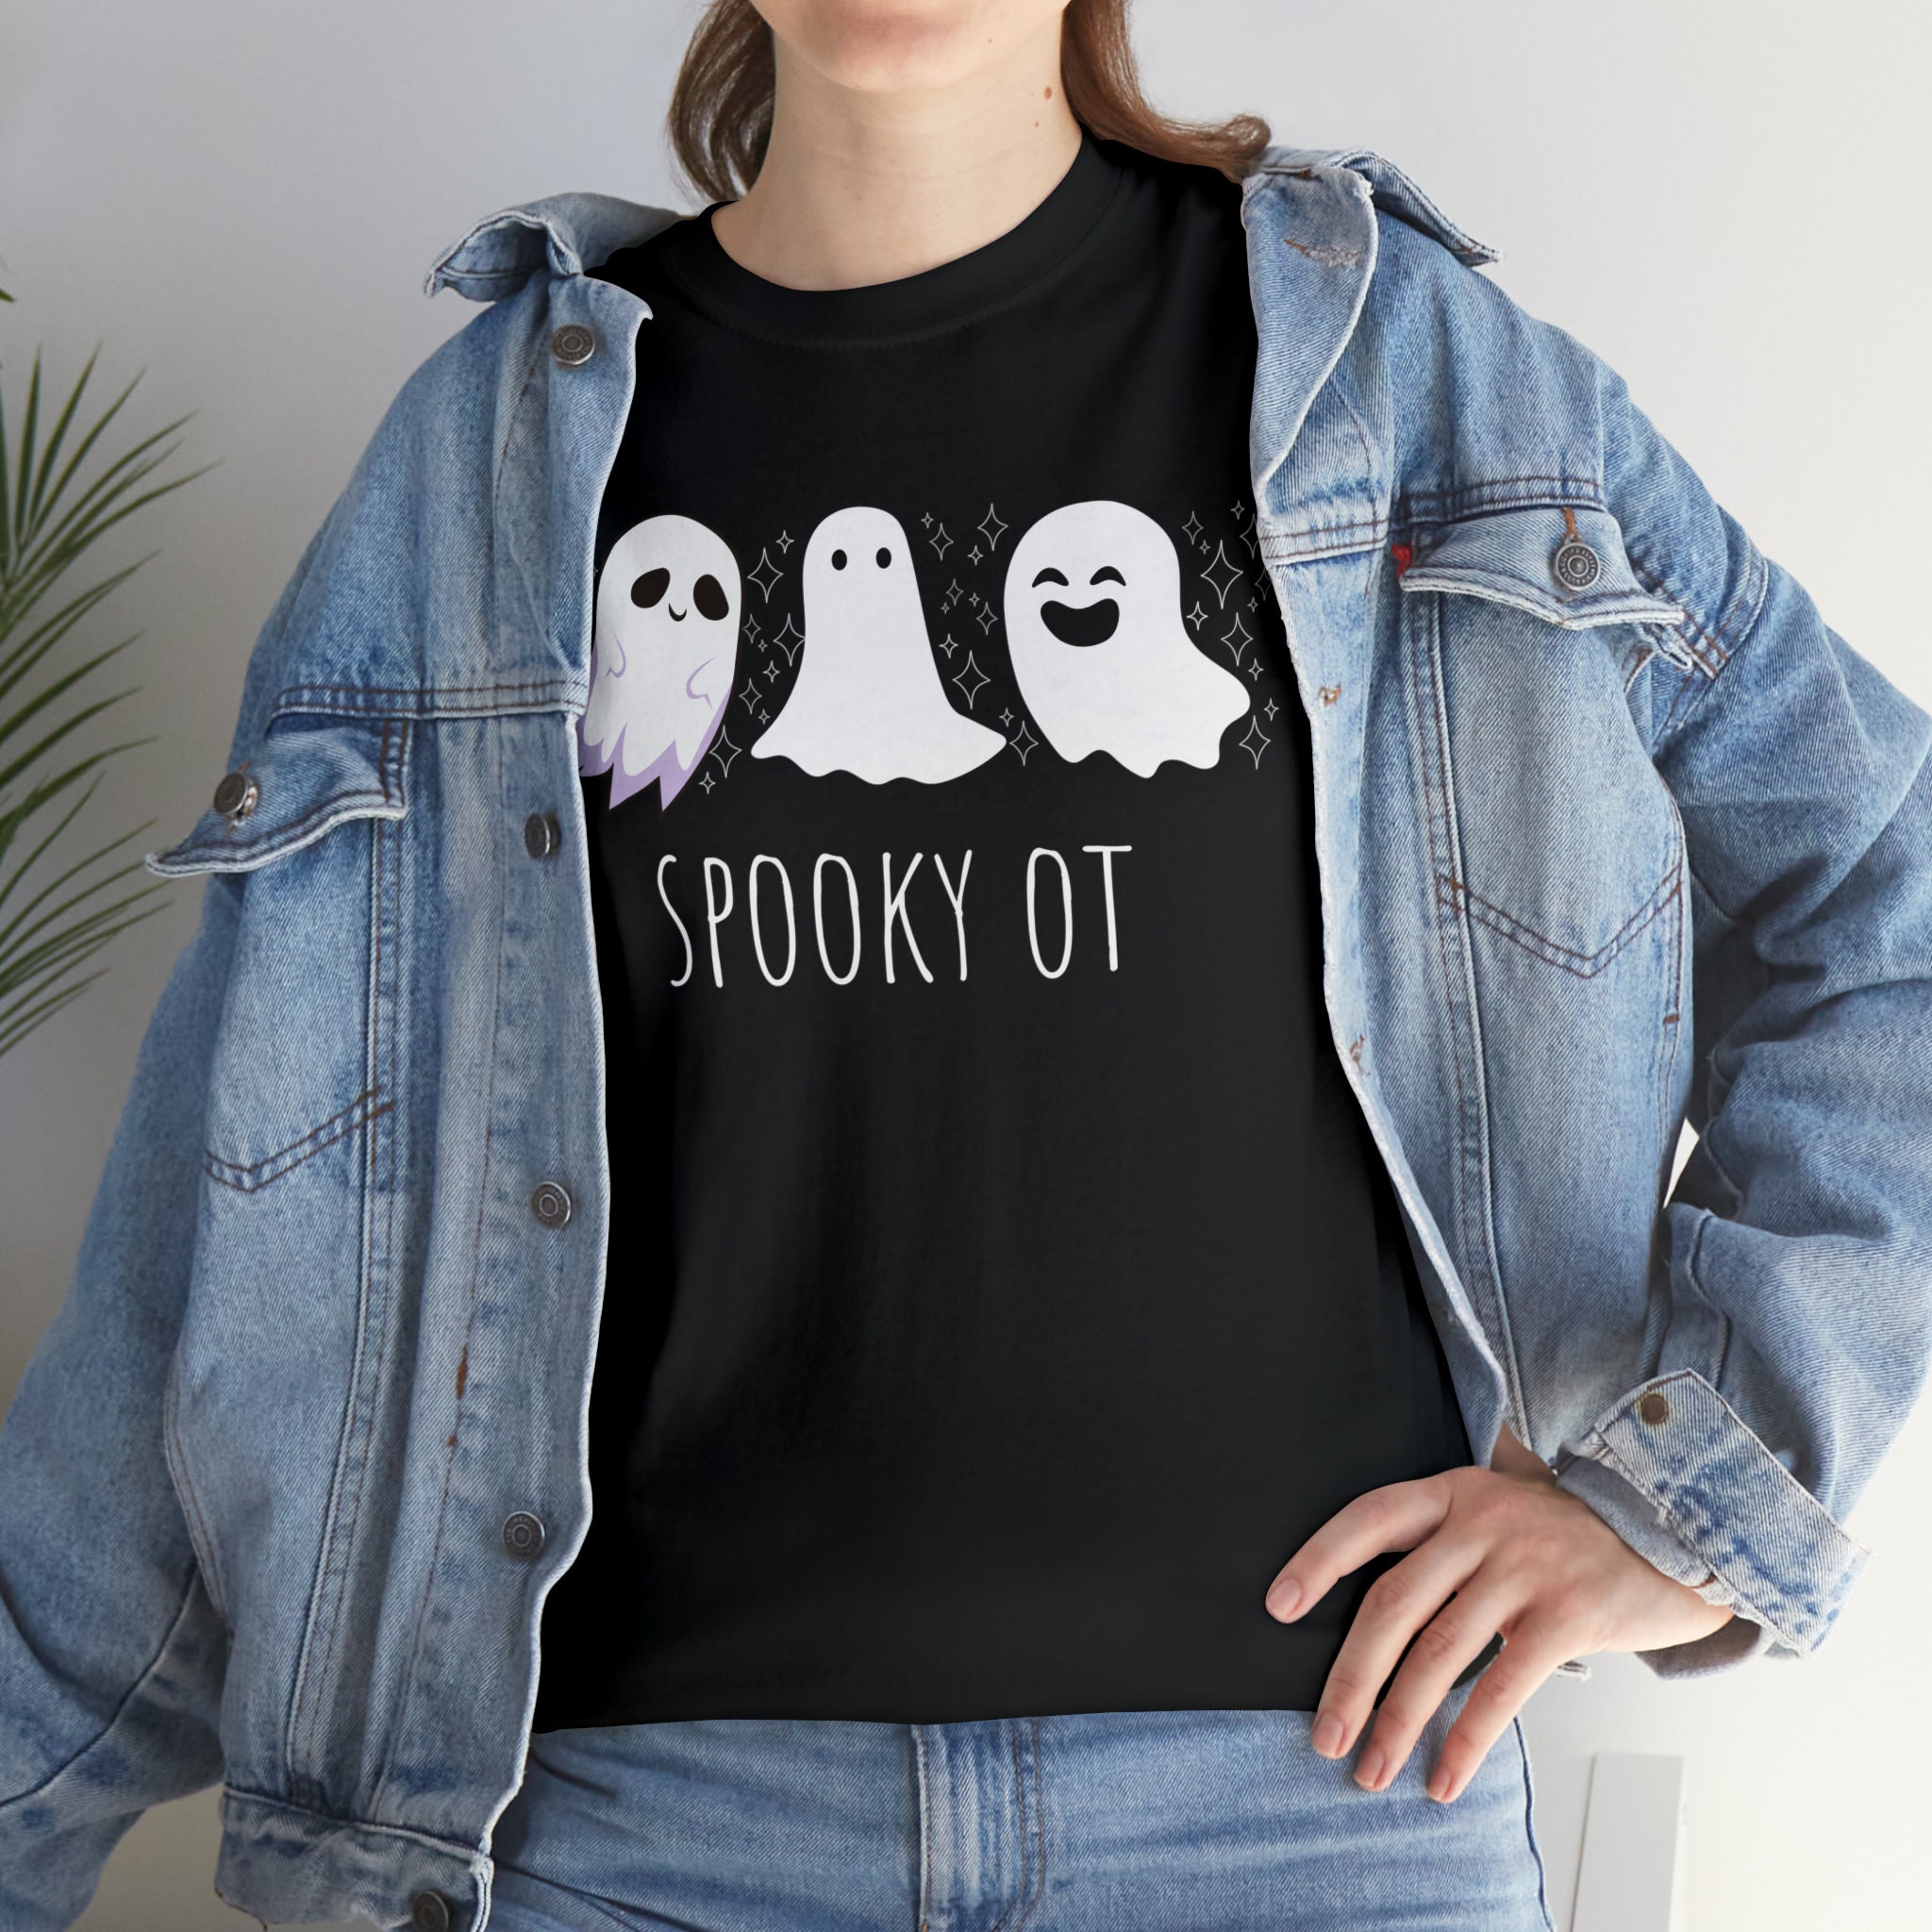 Discover Occupational therapy shirt, Occupational therapist Halloween shirt, OT ghost shirt, Occupational therapist gift, OT gift, OT sweatshirt